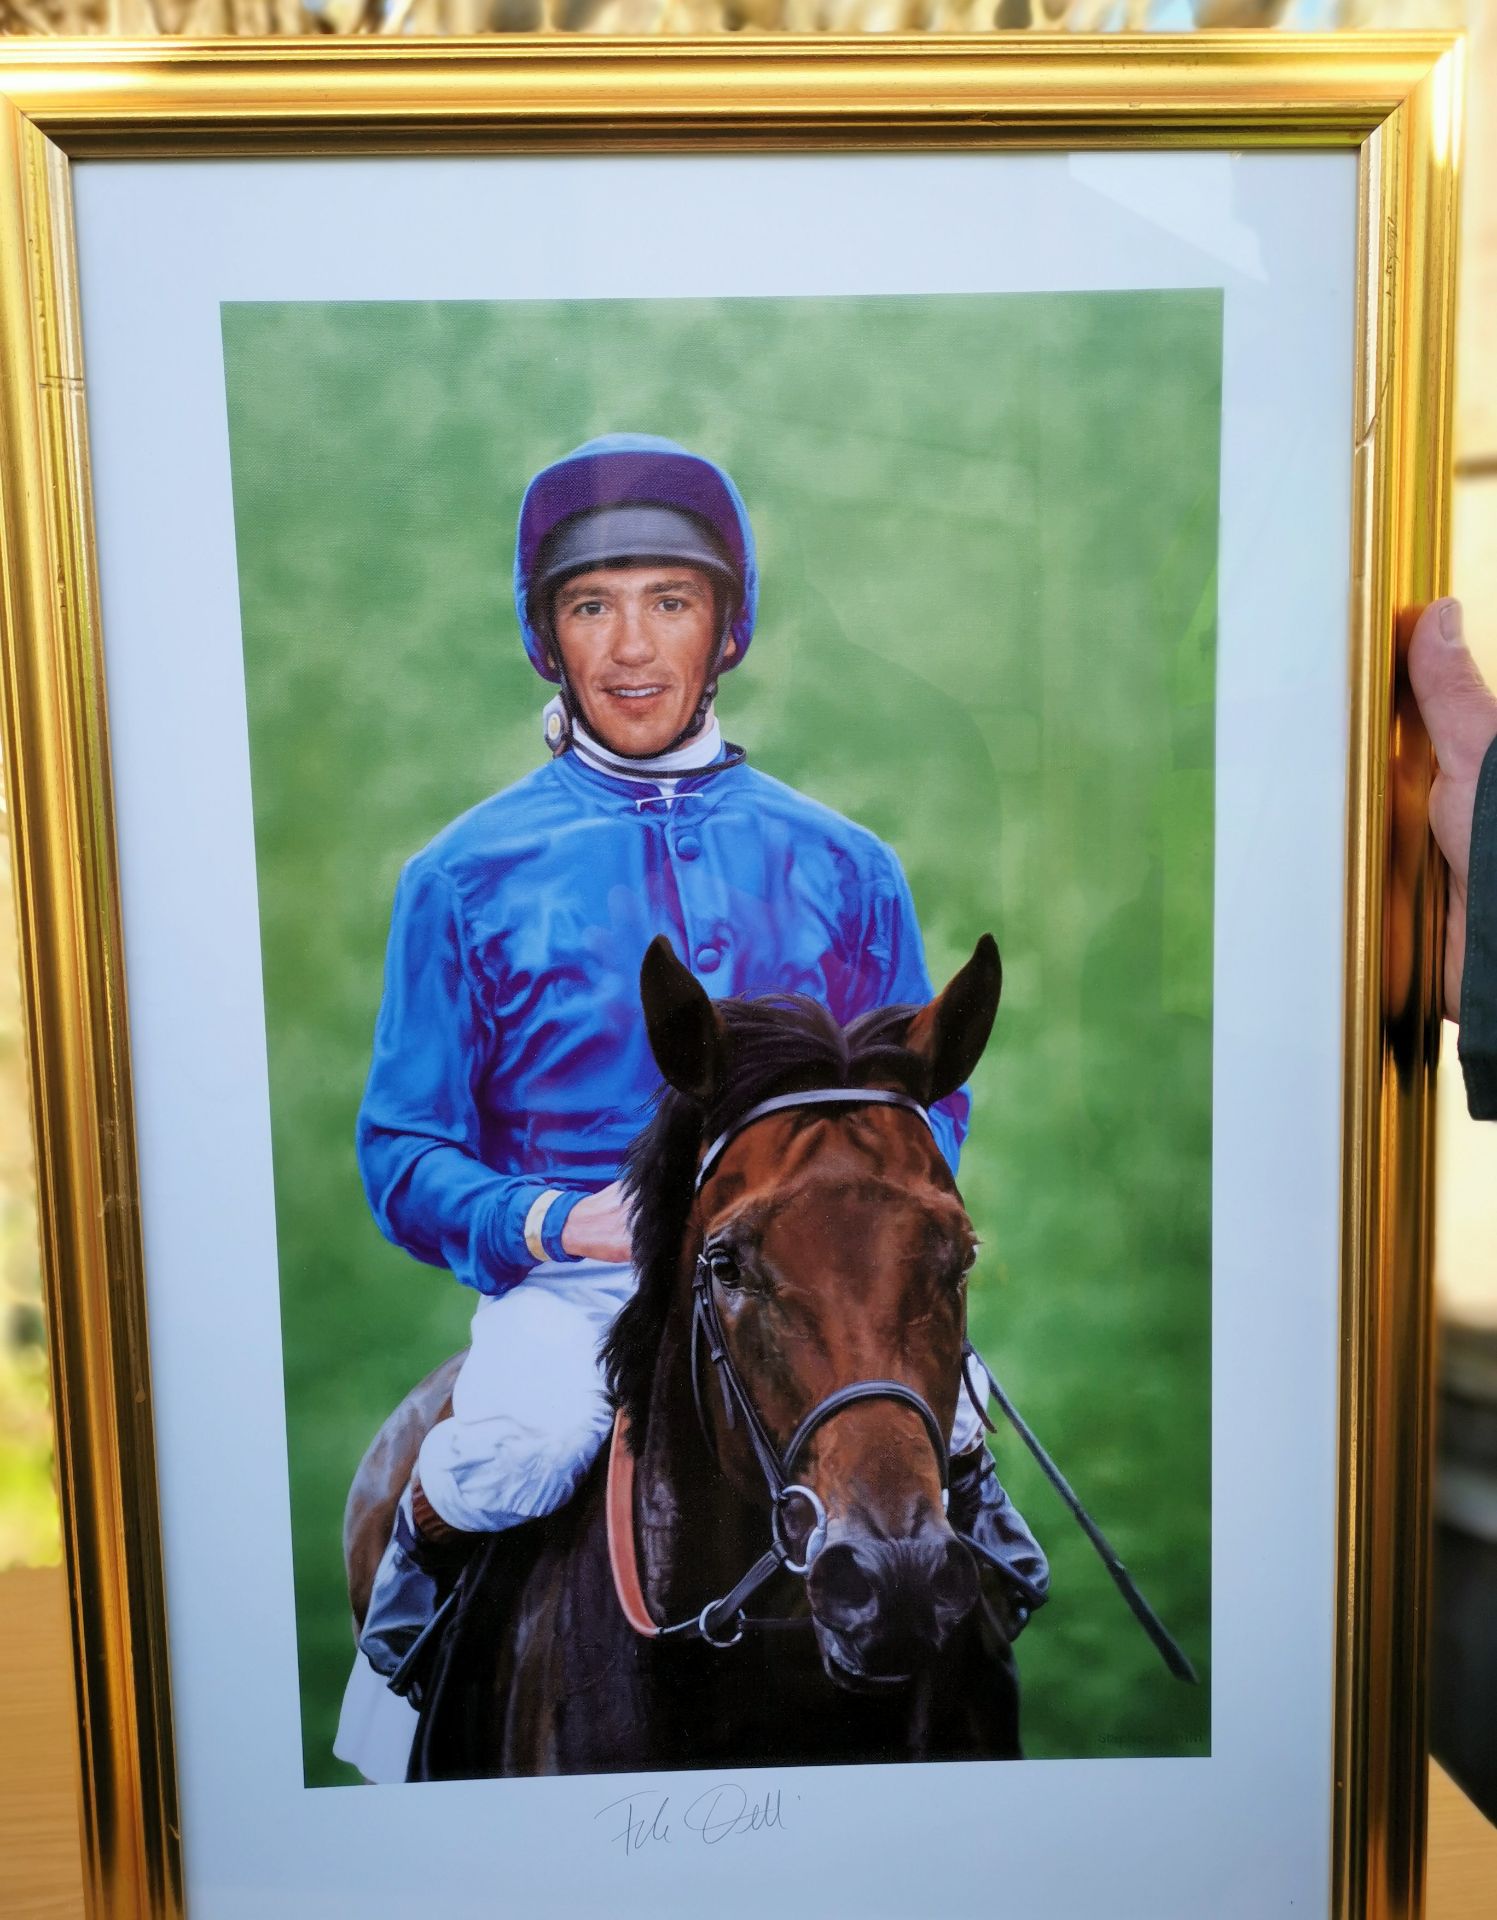 1 x Signed Frankie Dettori Picture - Dimensions: 780 x 540 mm - CL355 - Location: Great Yarmouth